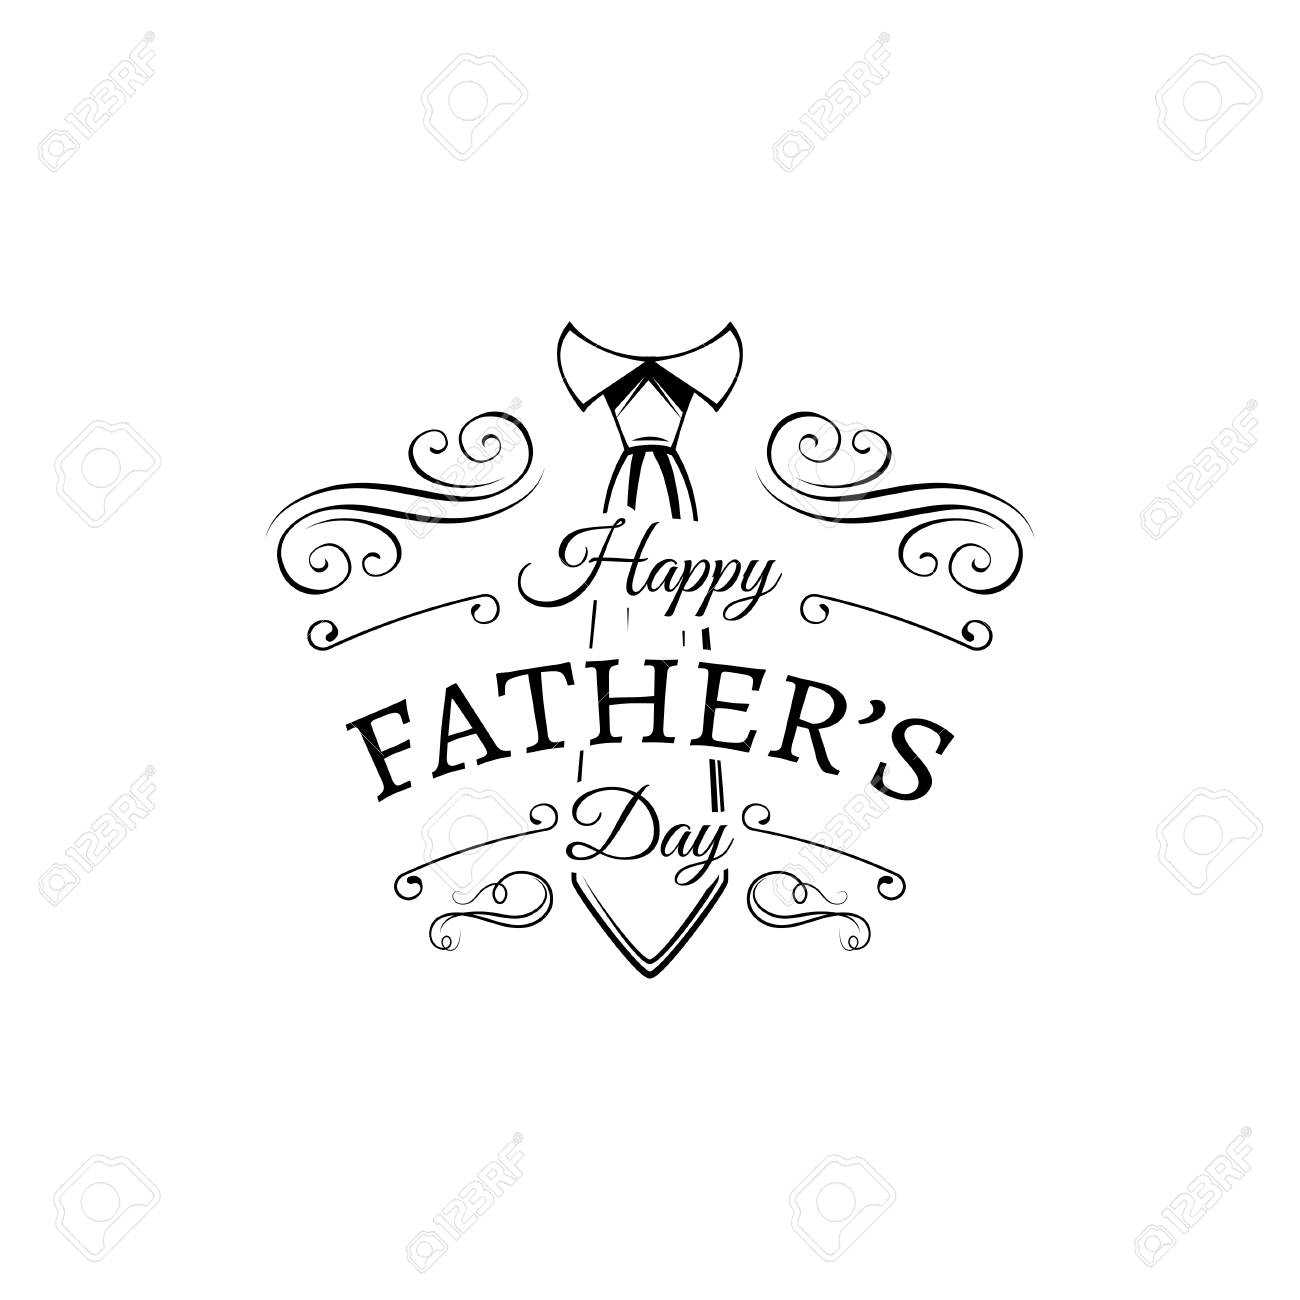 Happy Fathers Day Card Design With Necktie Vector Illustration Inside Fathers Day Card Template